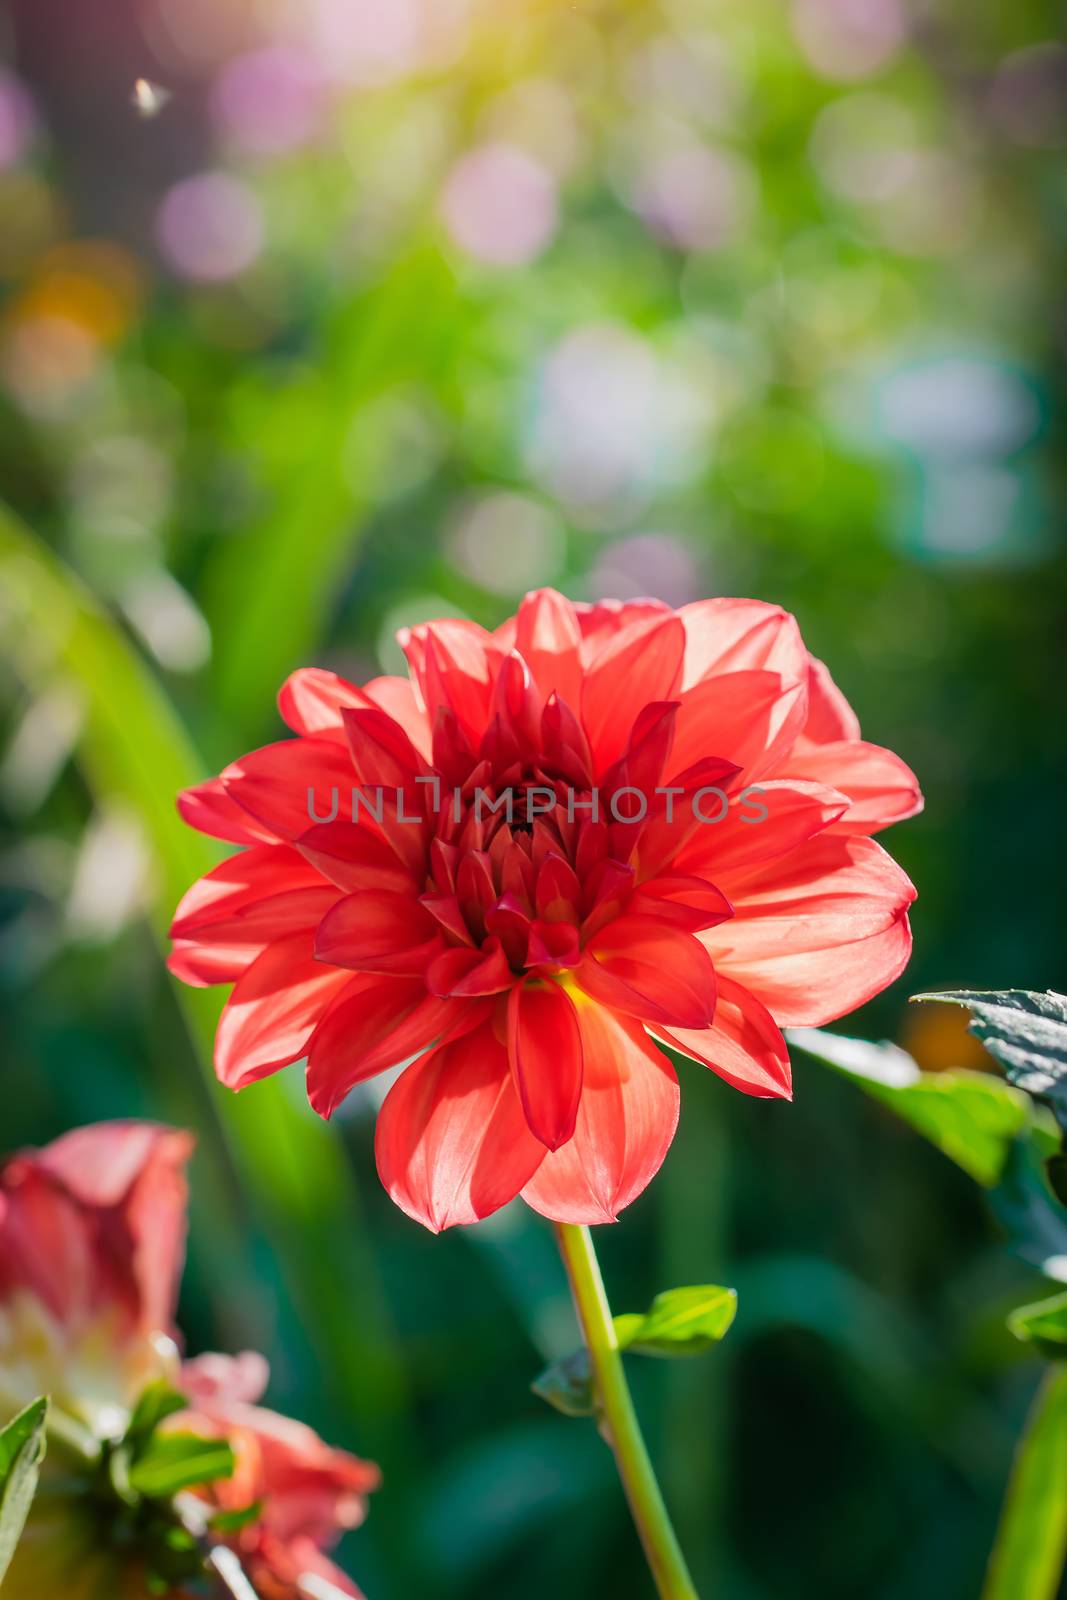 flowering red dahlias in the garden on a blurred background